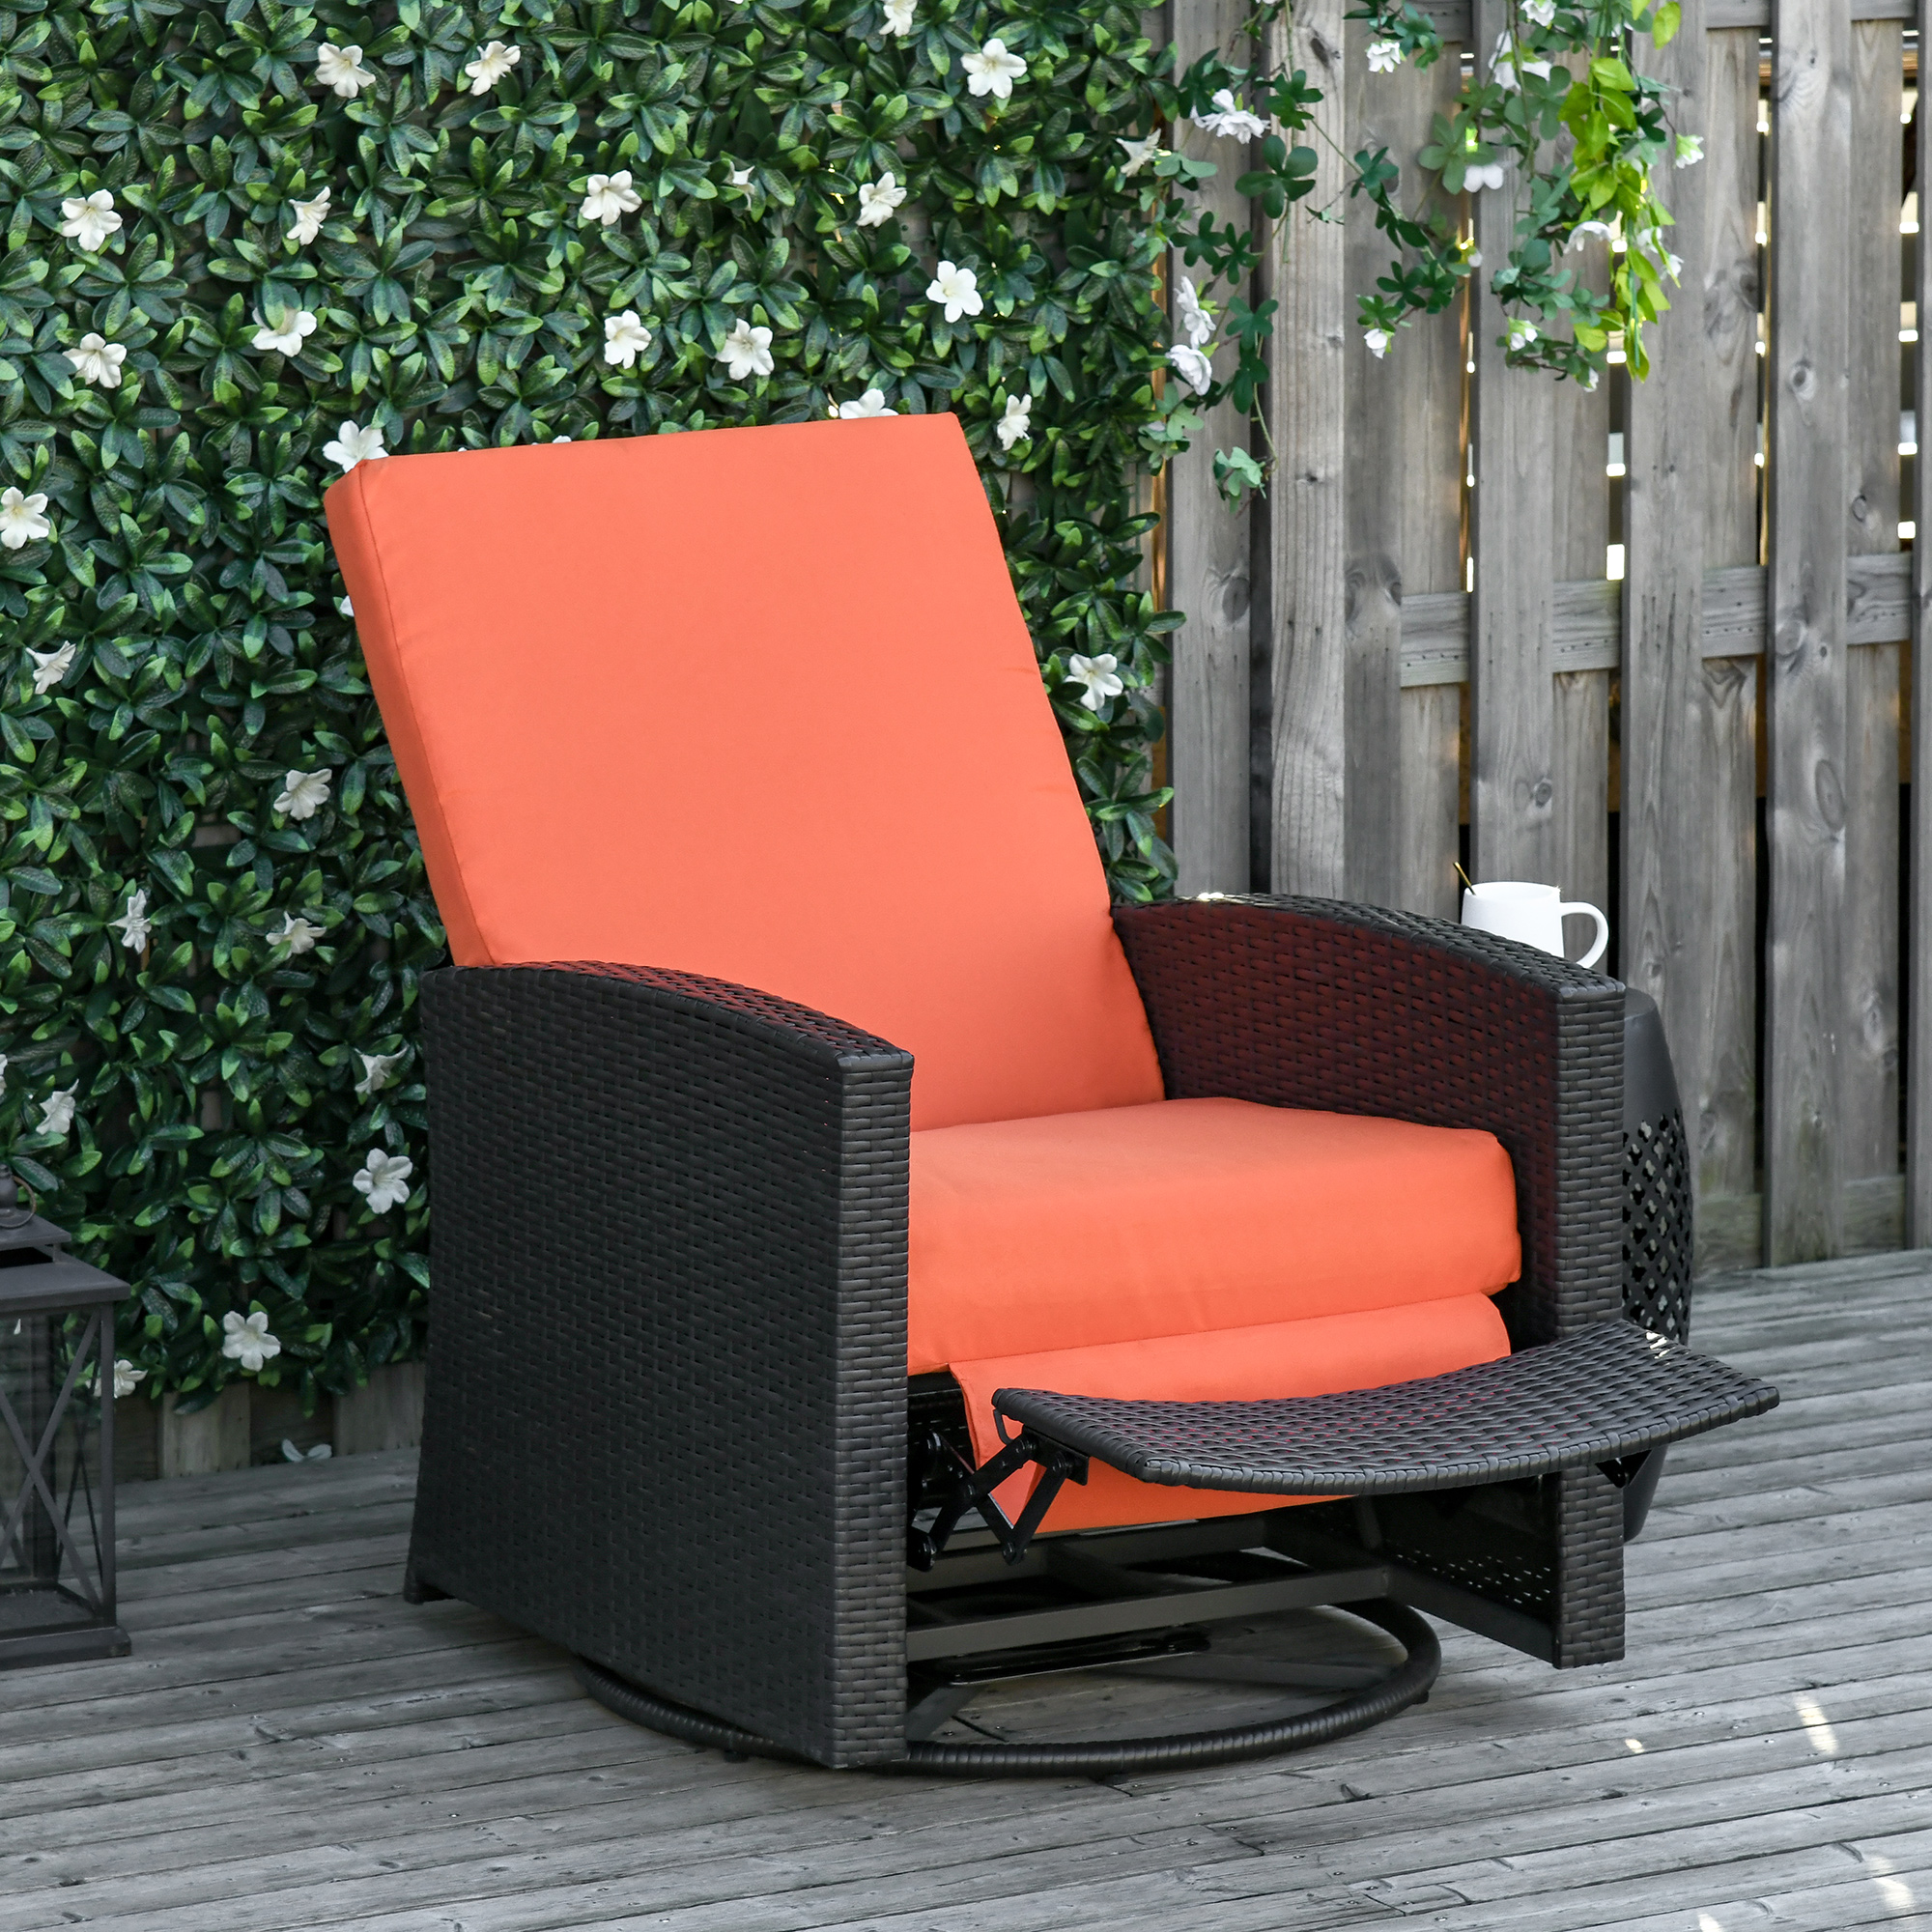 Outsunny Rattan Wicker Reclining Sofa Swivel Chair Cushioned for Outdoor - image 2 of 9